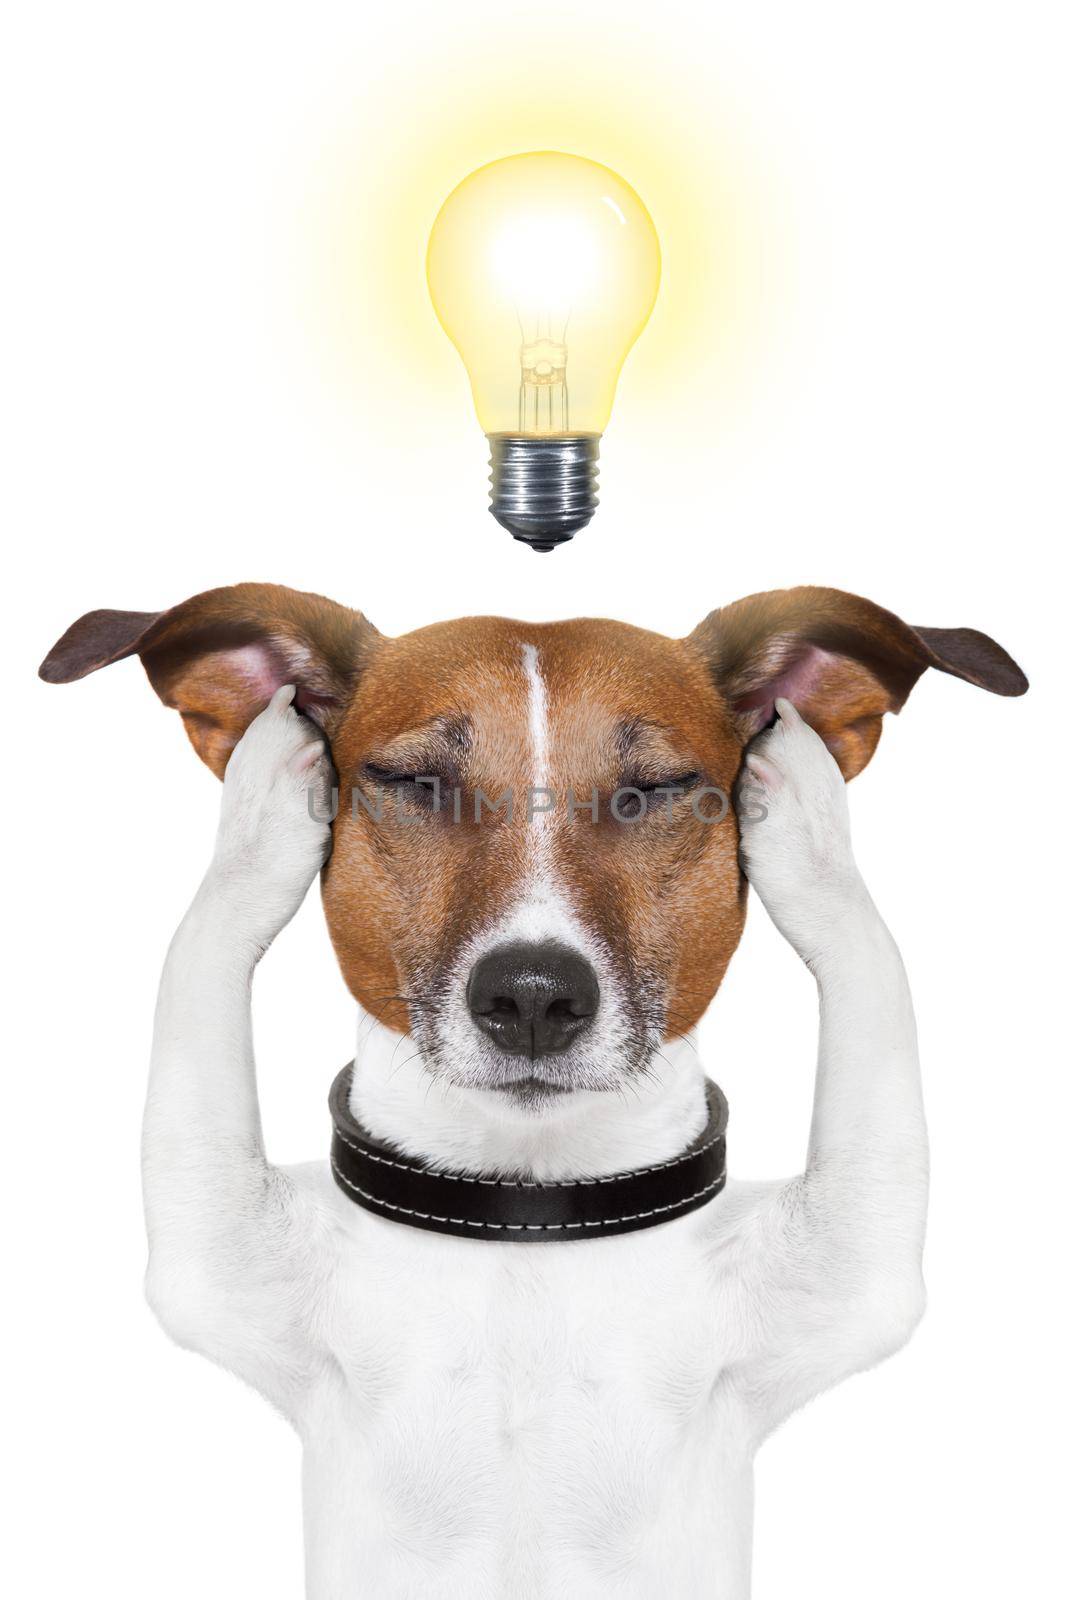 smart dog thinking with a light bulb on top